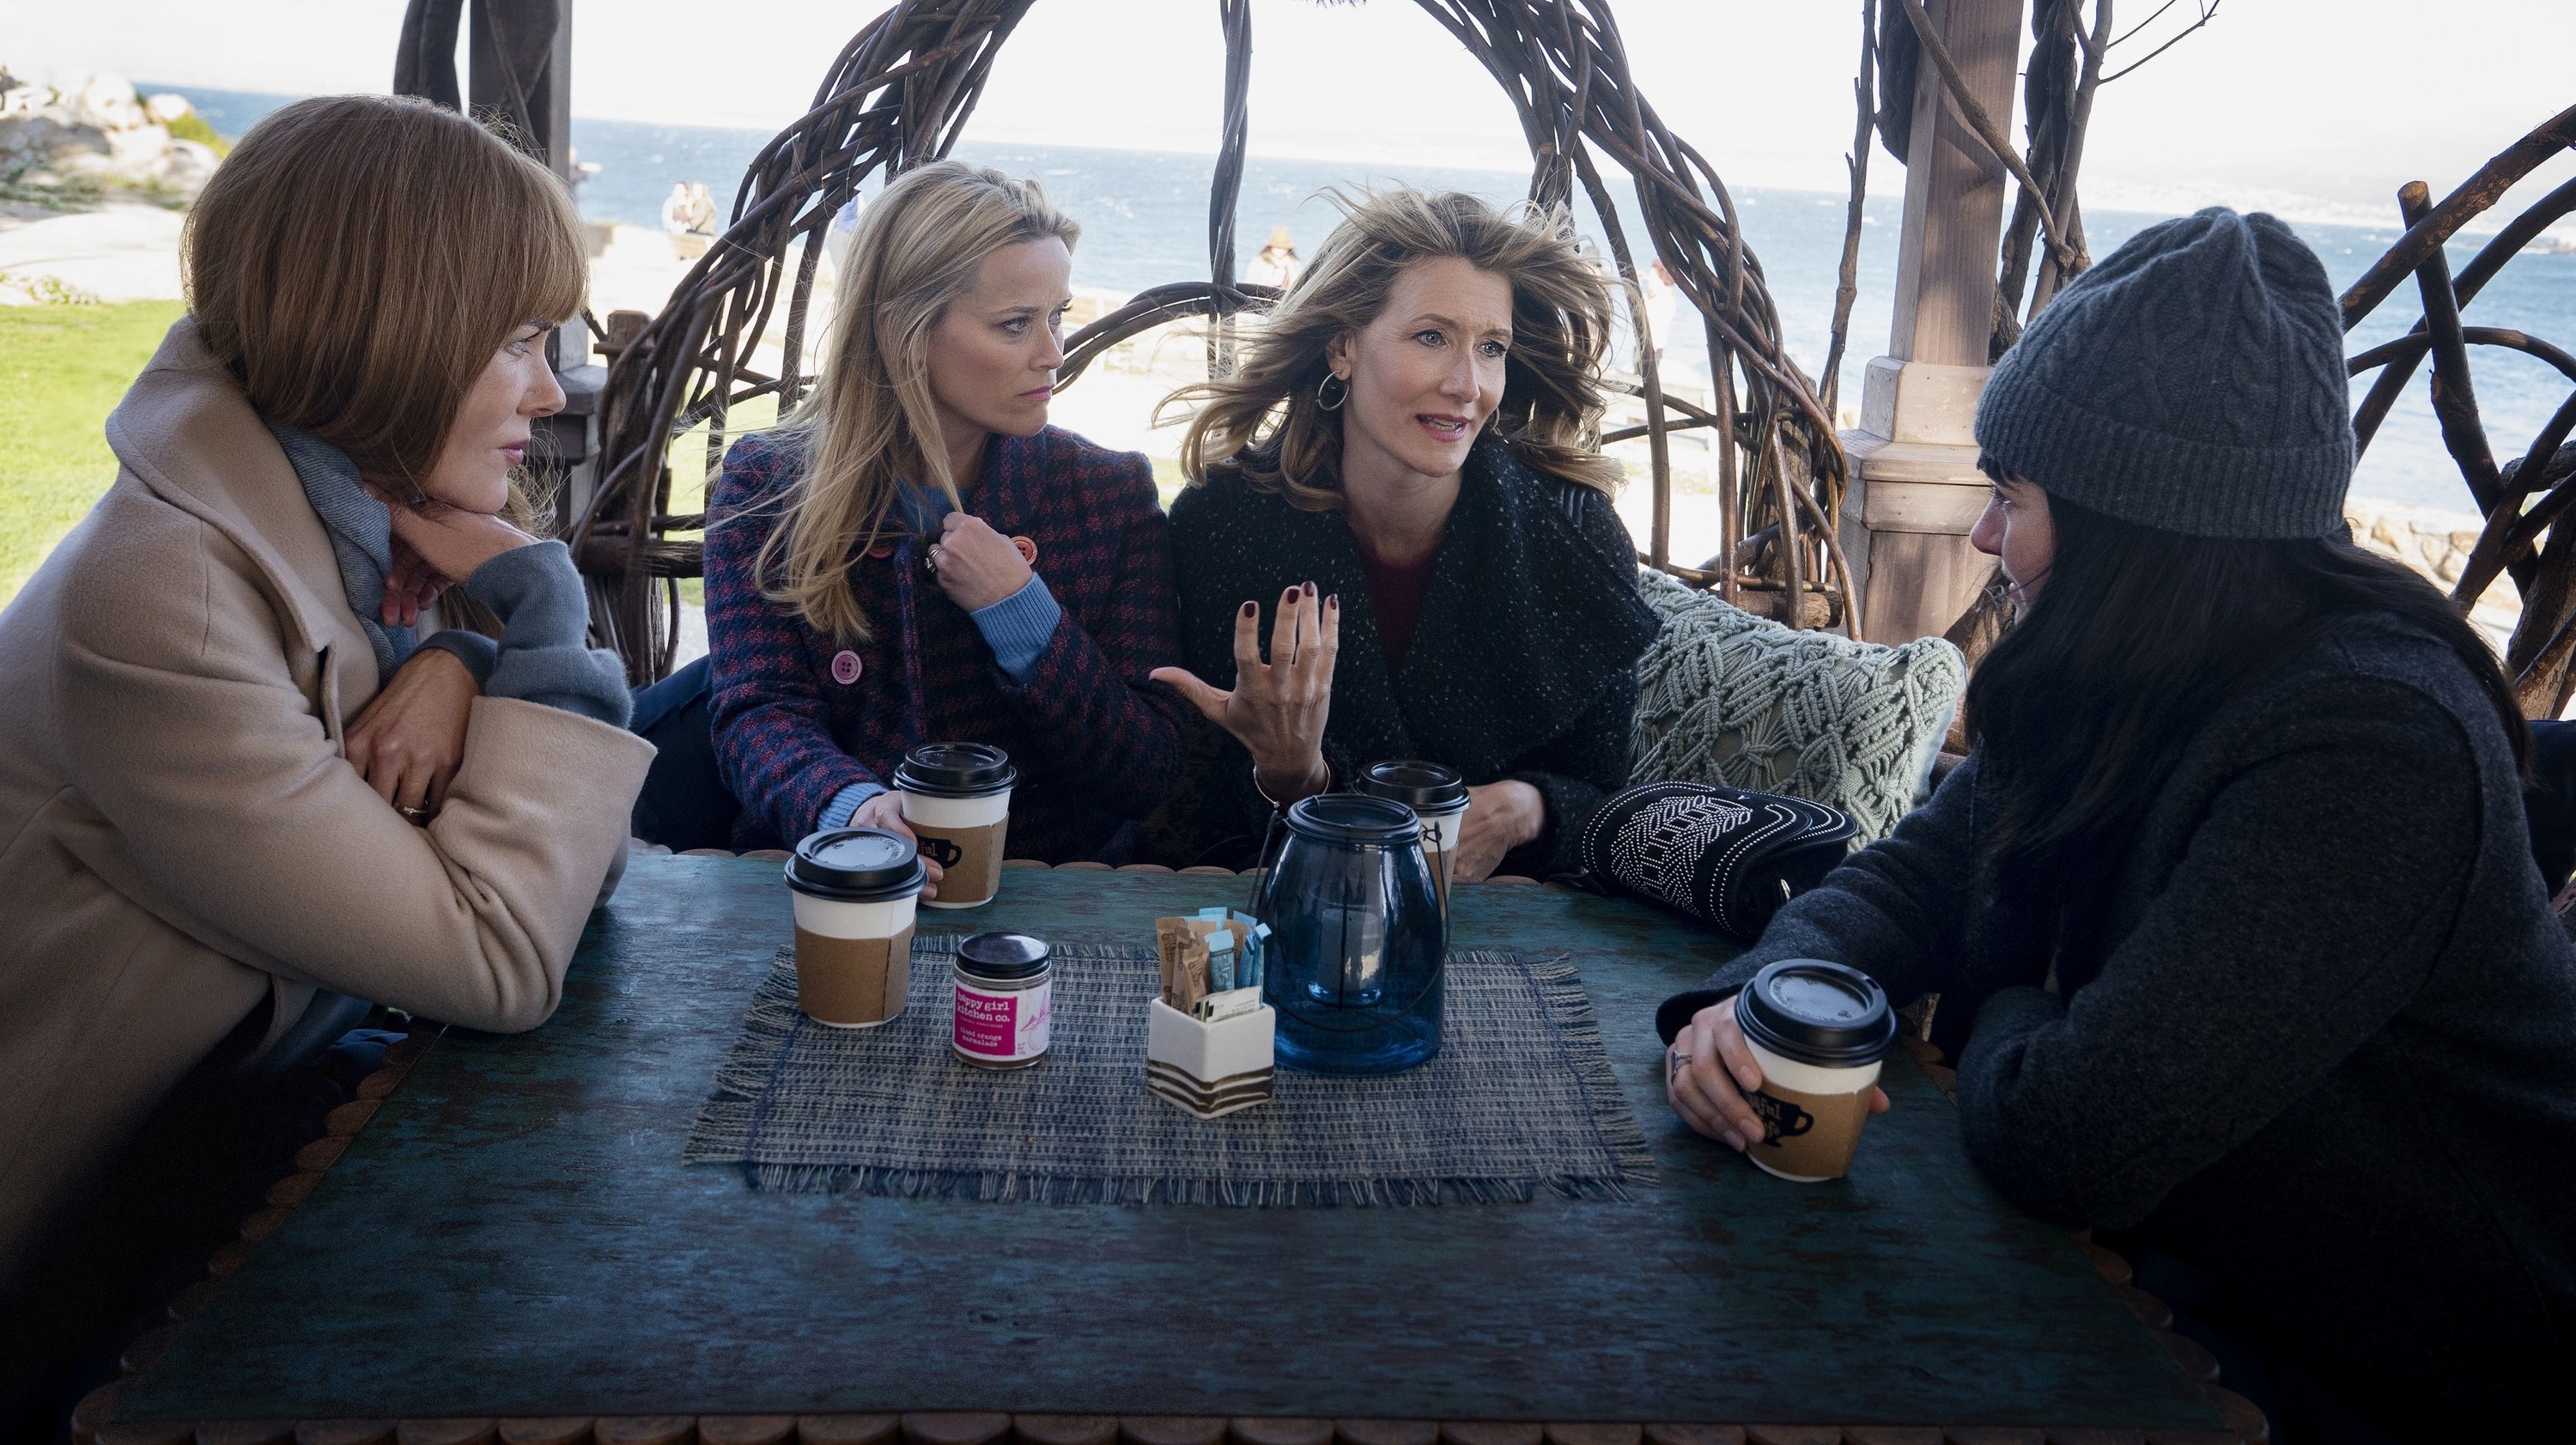 Nicole Kidman as Celeste Reese Witherspoon as Madeline Laura Dern as Renata and Shailene Woodley as Jane drinking coffee and talking at a table outdoors in &quot;Big Little Lies&quot;